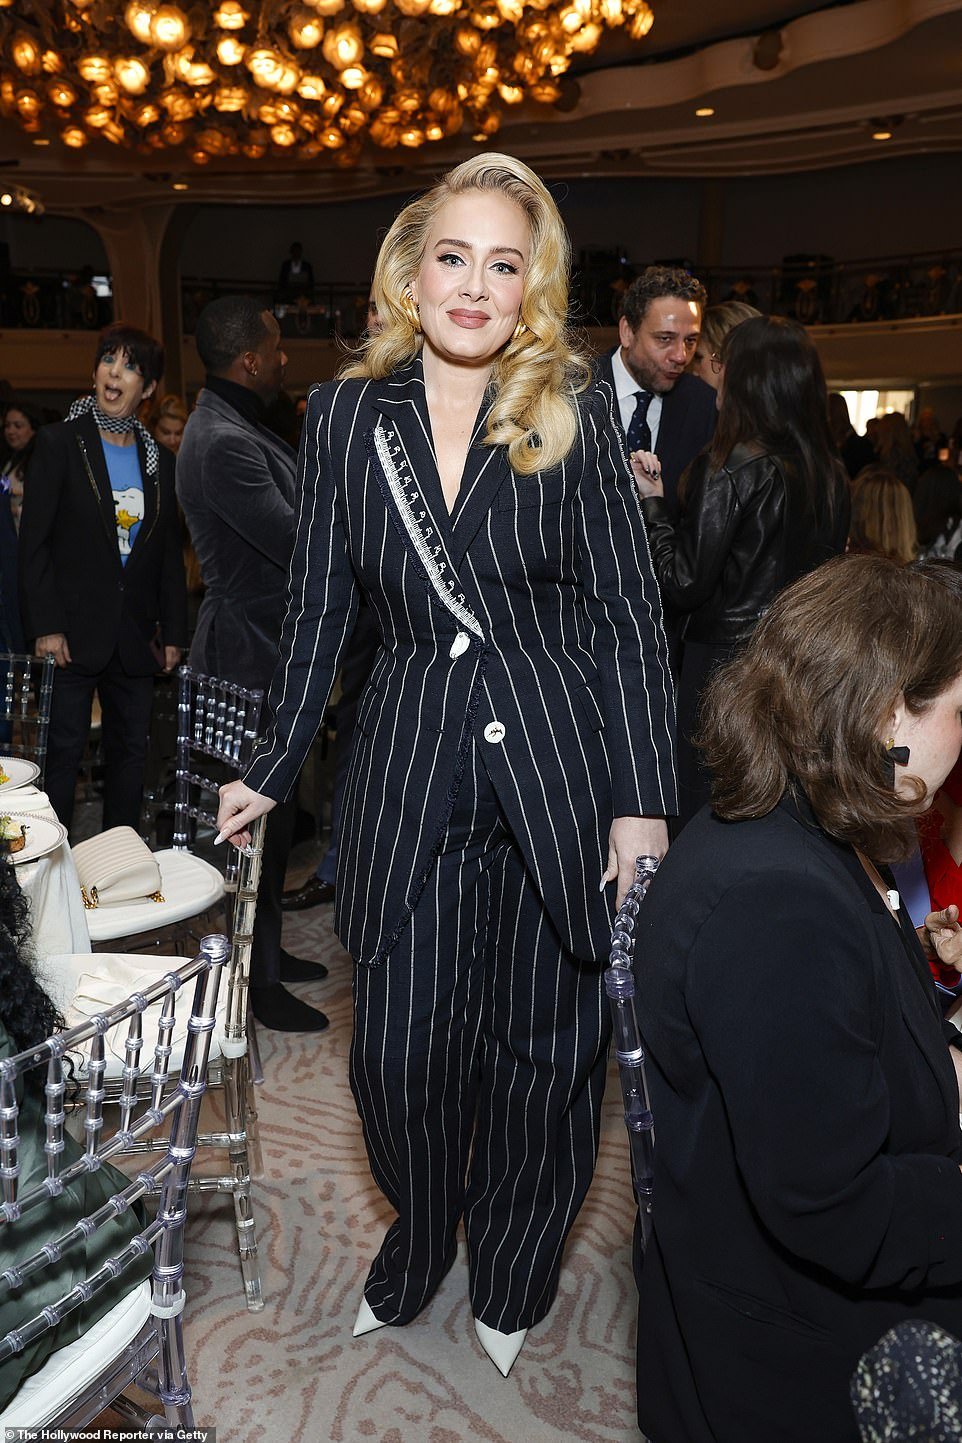 Adele wowed in a fitted black and white pinstripe suit at The Hollywood Reporter's Women in Entertainment Gala at the Beverly Hills Hotel in Los Angeles